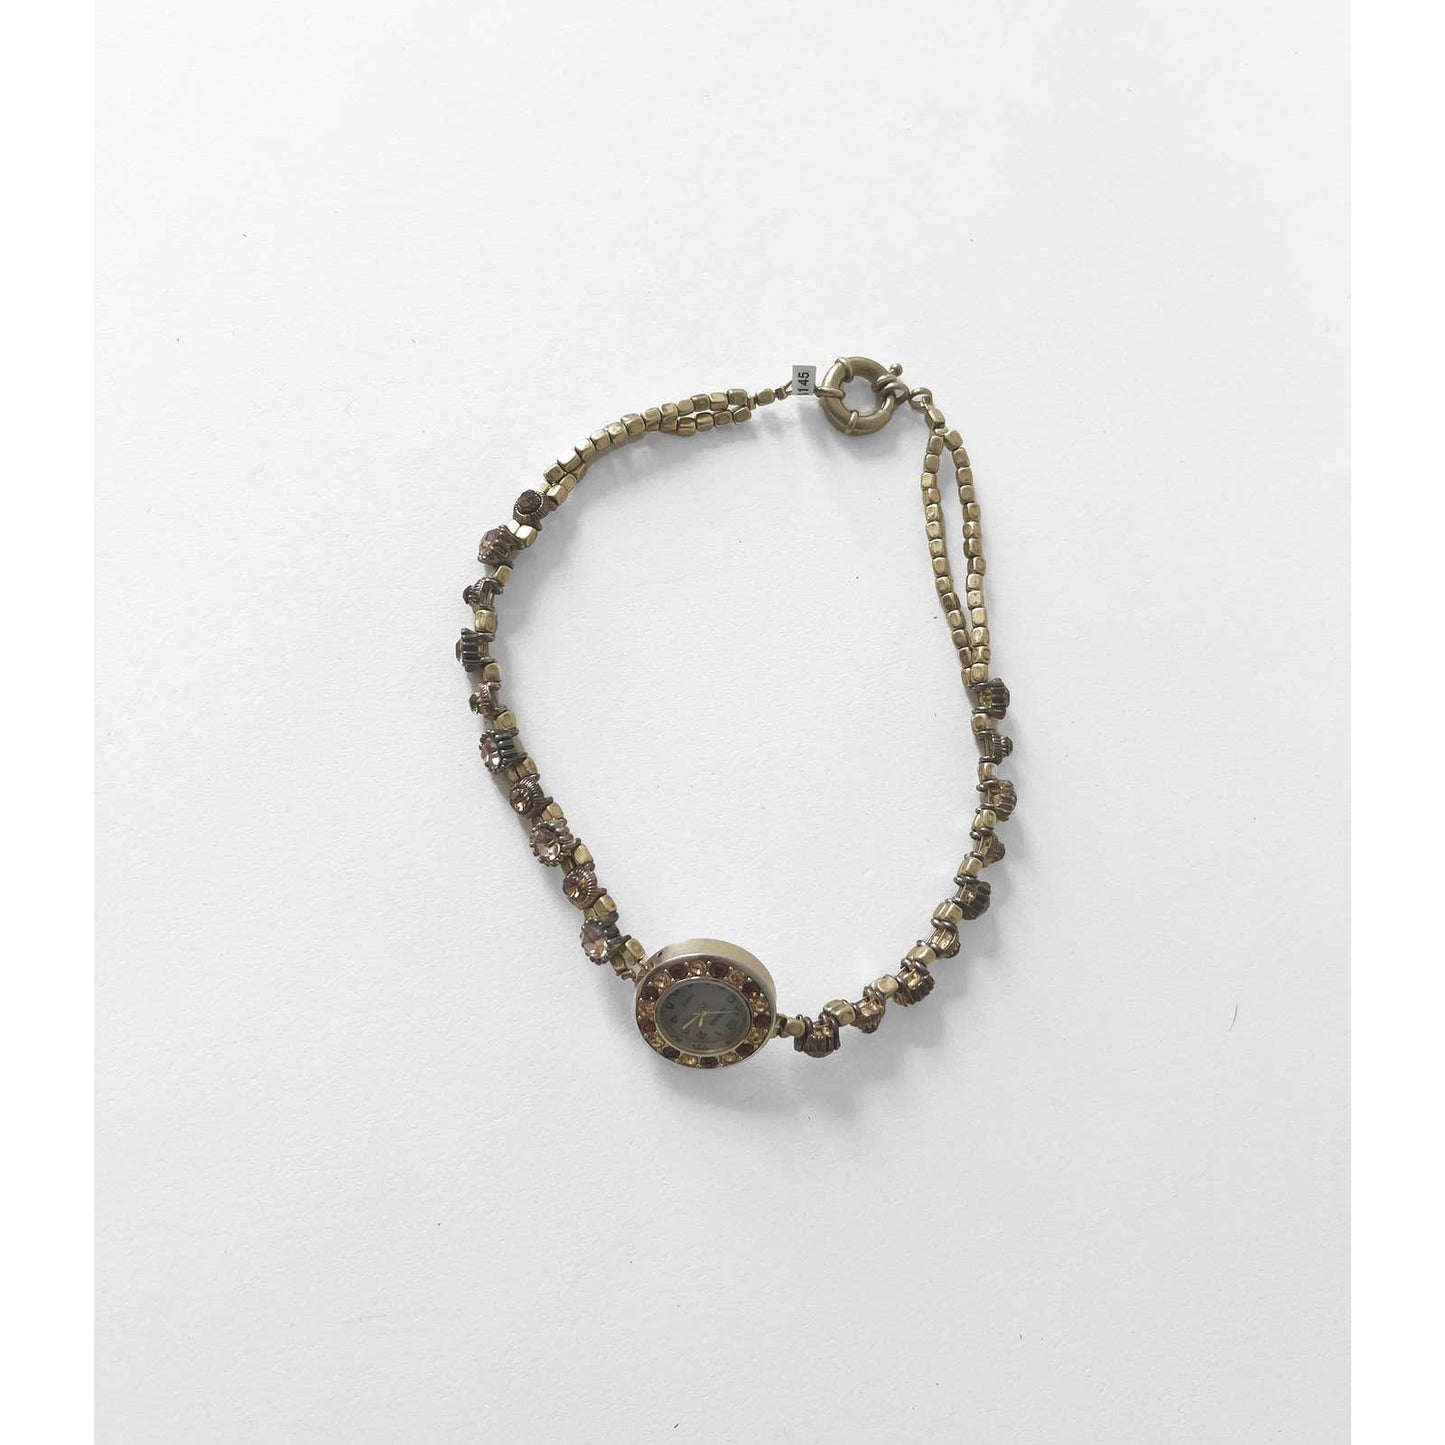 Watch Necklace | Vintage One of a Kind Watch Choker with Brass Details